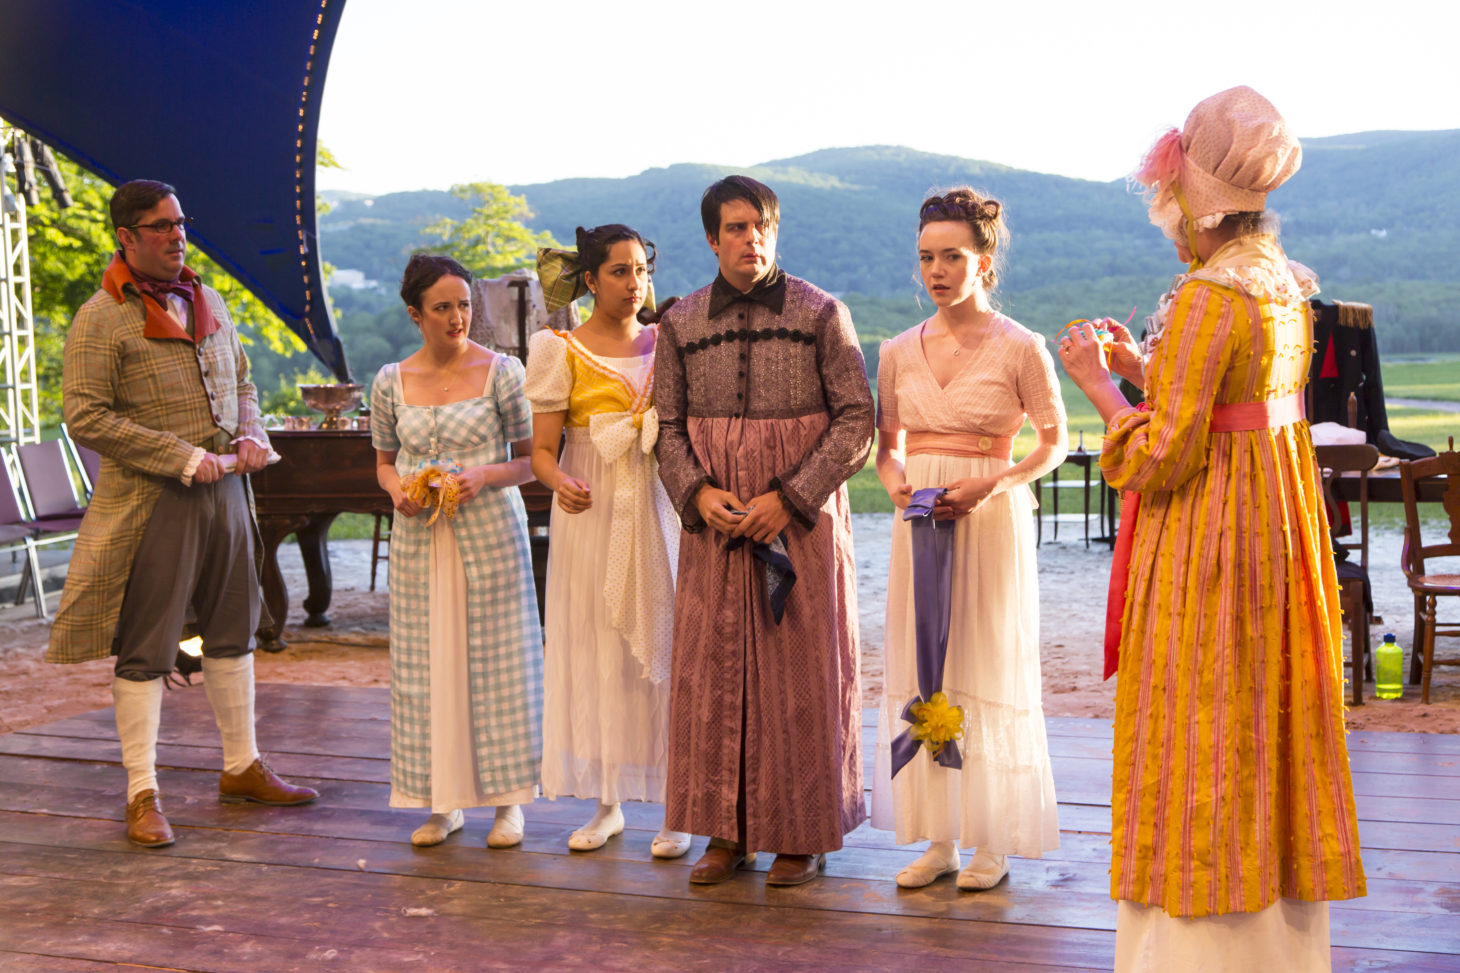 HVSF's 2017 Production of PRIDE AND PREJUDICE. From left to right: Chris Thorn, Kate Hamill, Kimberly Chatterjee, John Tufts, Amelia Pedlow, and Nance Williamson.